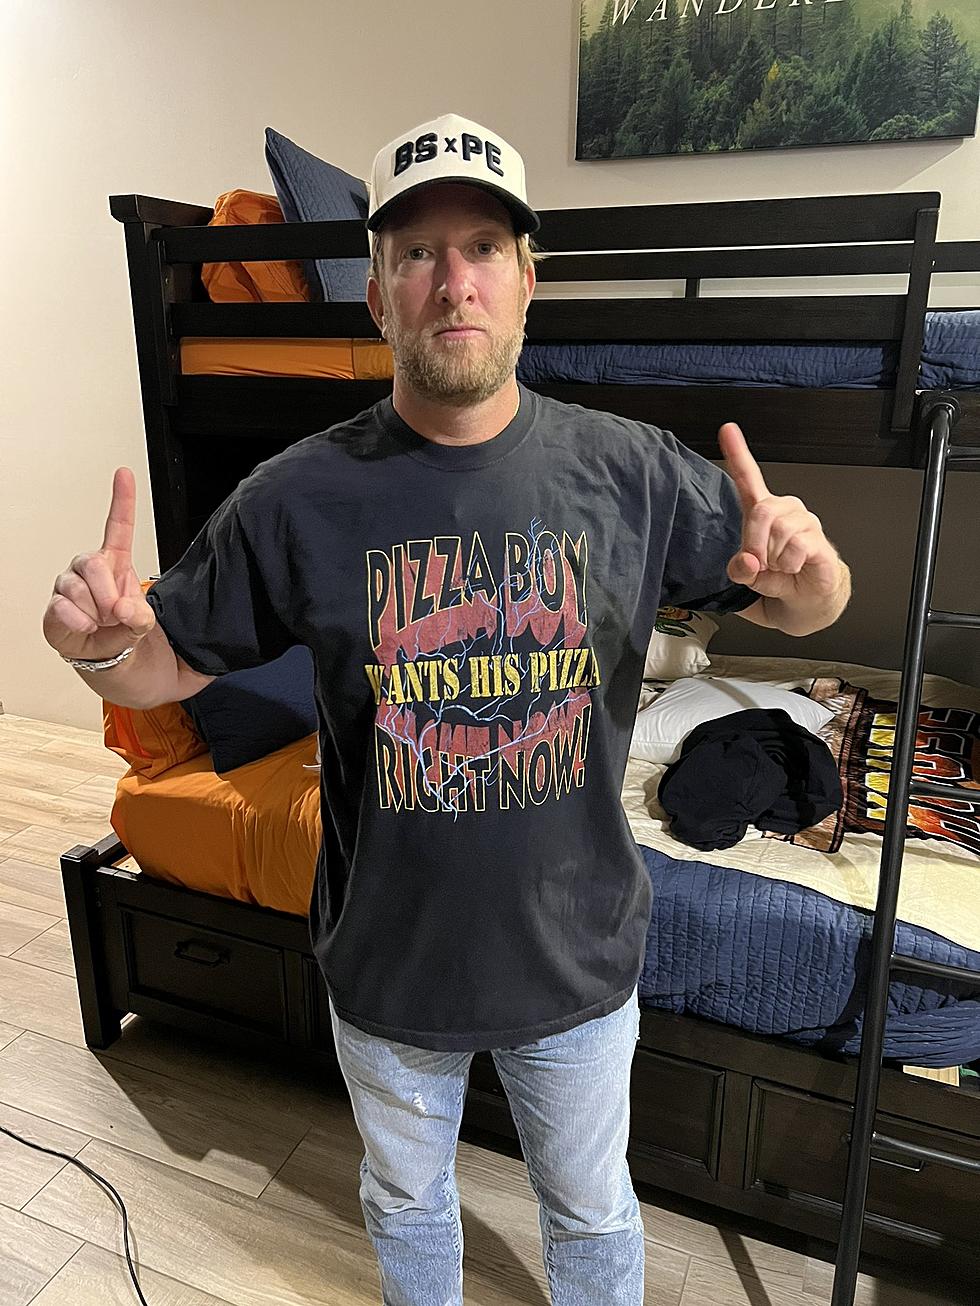 The Top Ten MA Pizza Shops According To Barstool's Dave Portnoy